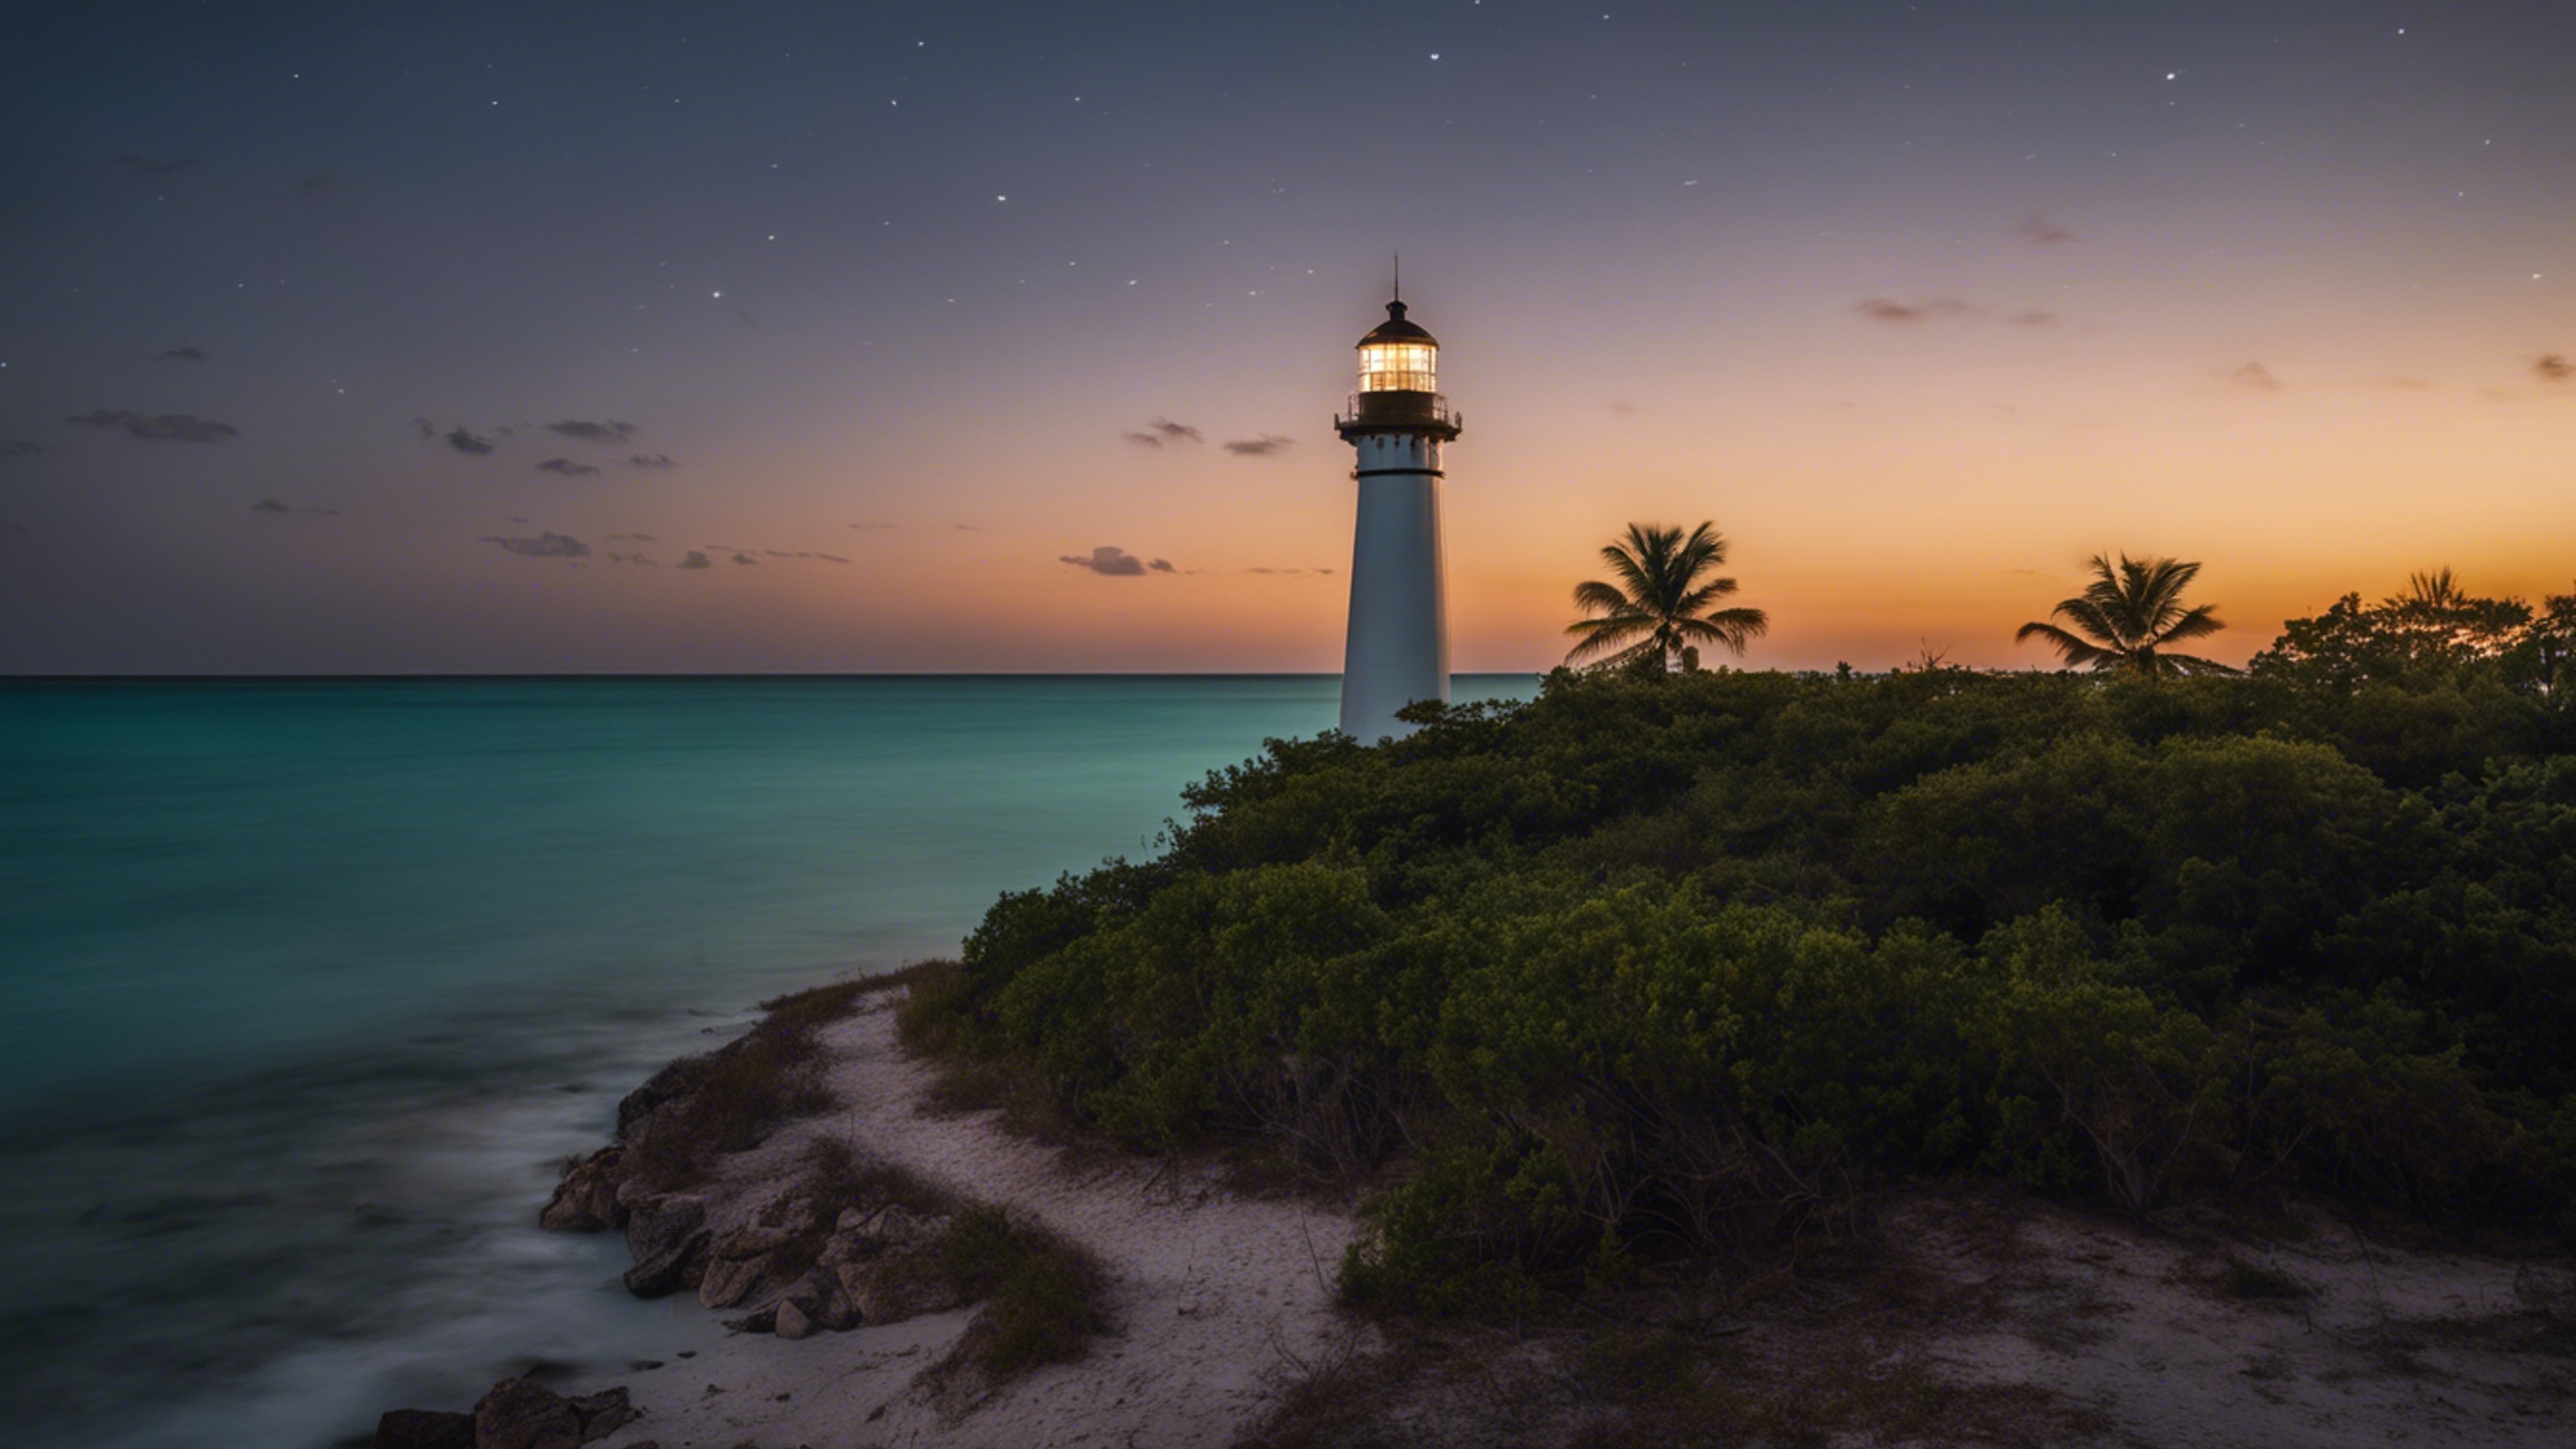 A night shot of an historic lighthouse in Key Biscayne, with the beam of light cutting through the darkness. Tapéta[4d5993bb763c4a90b239]